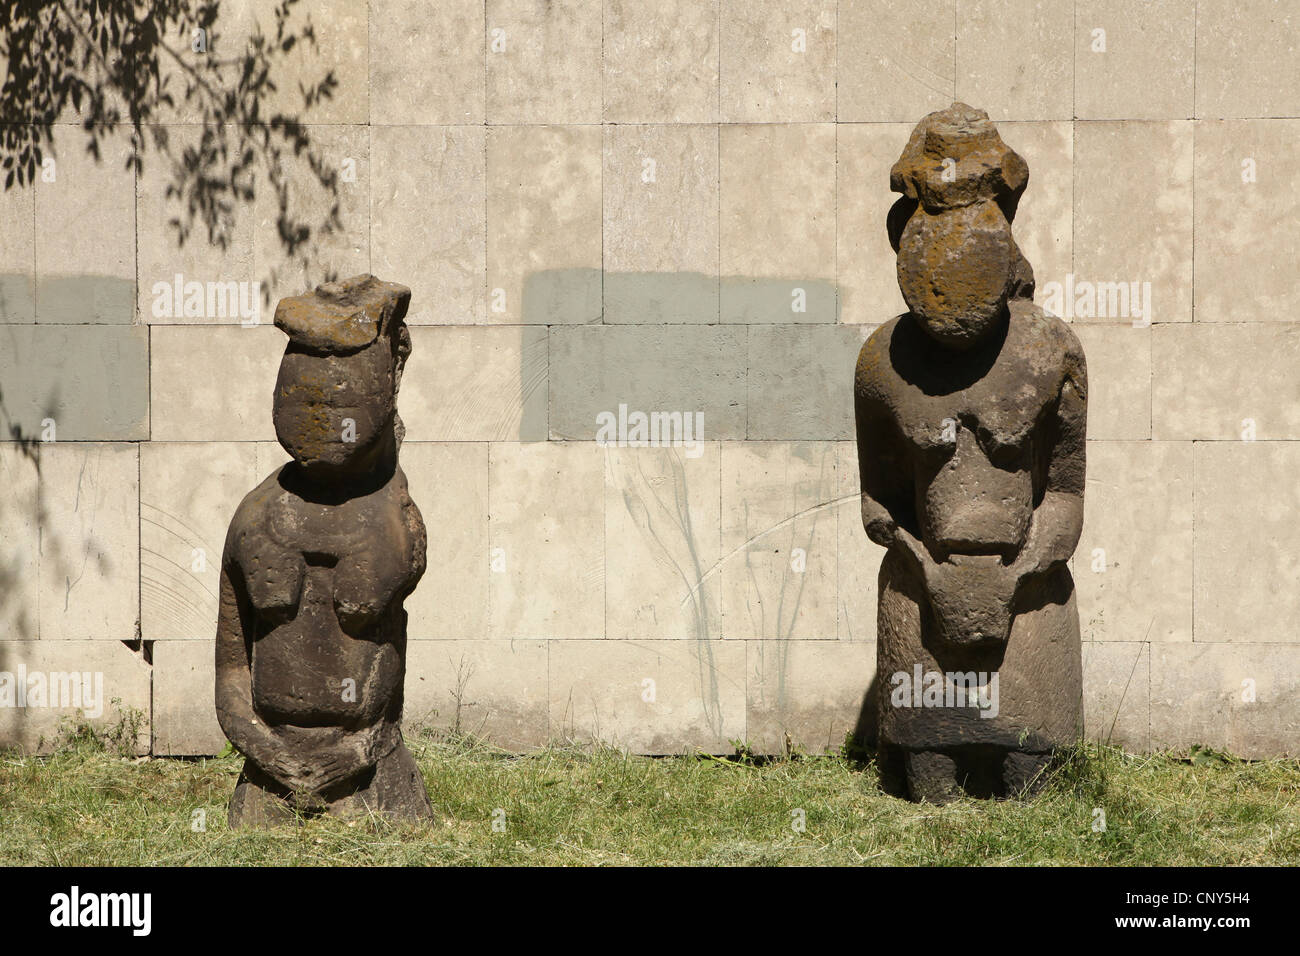 Kipchak stone statues known as the Stony Women exhibited in front of the Historical Museum in Dnipro (Dnipropetrovsk), Ukraine. Stock Photo